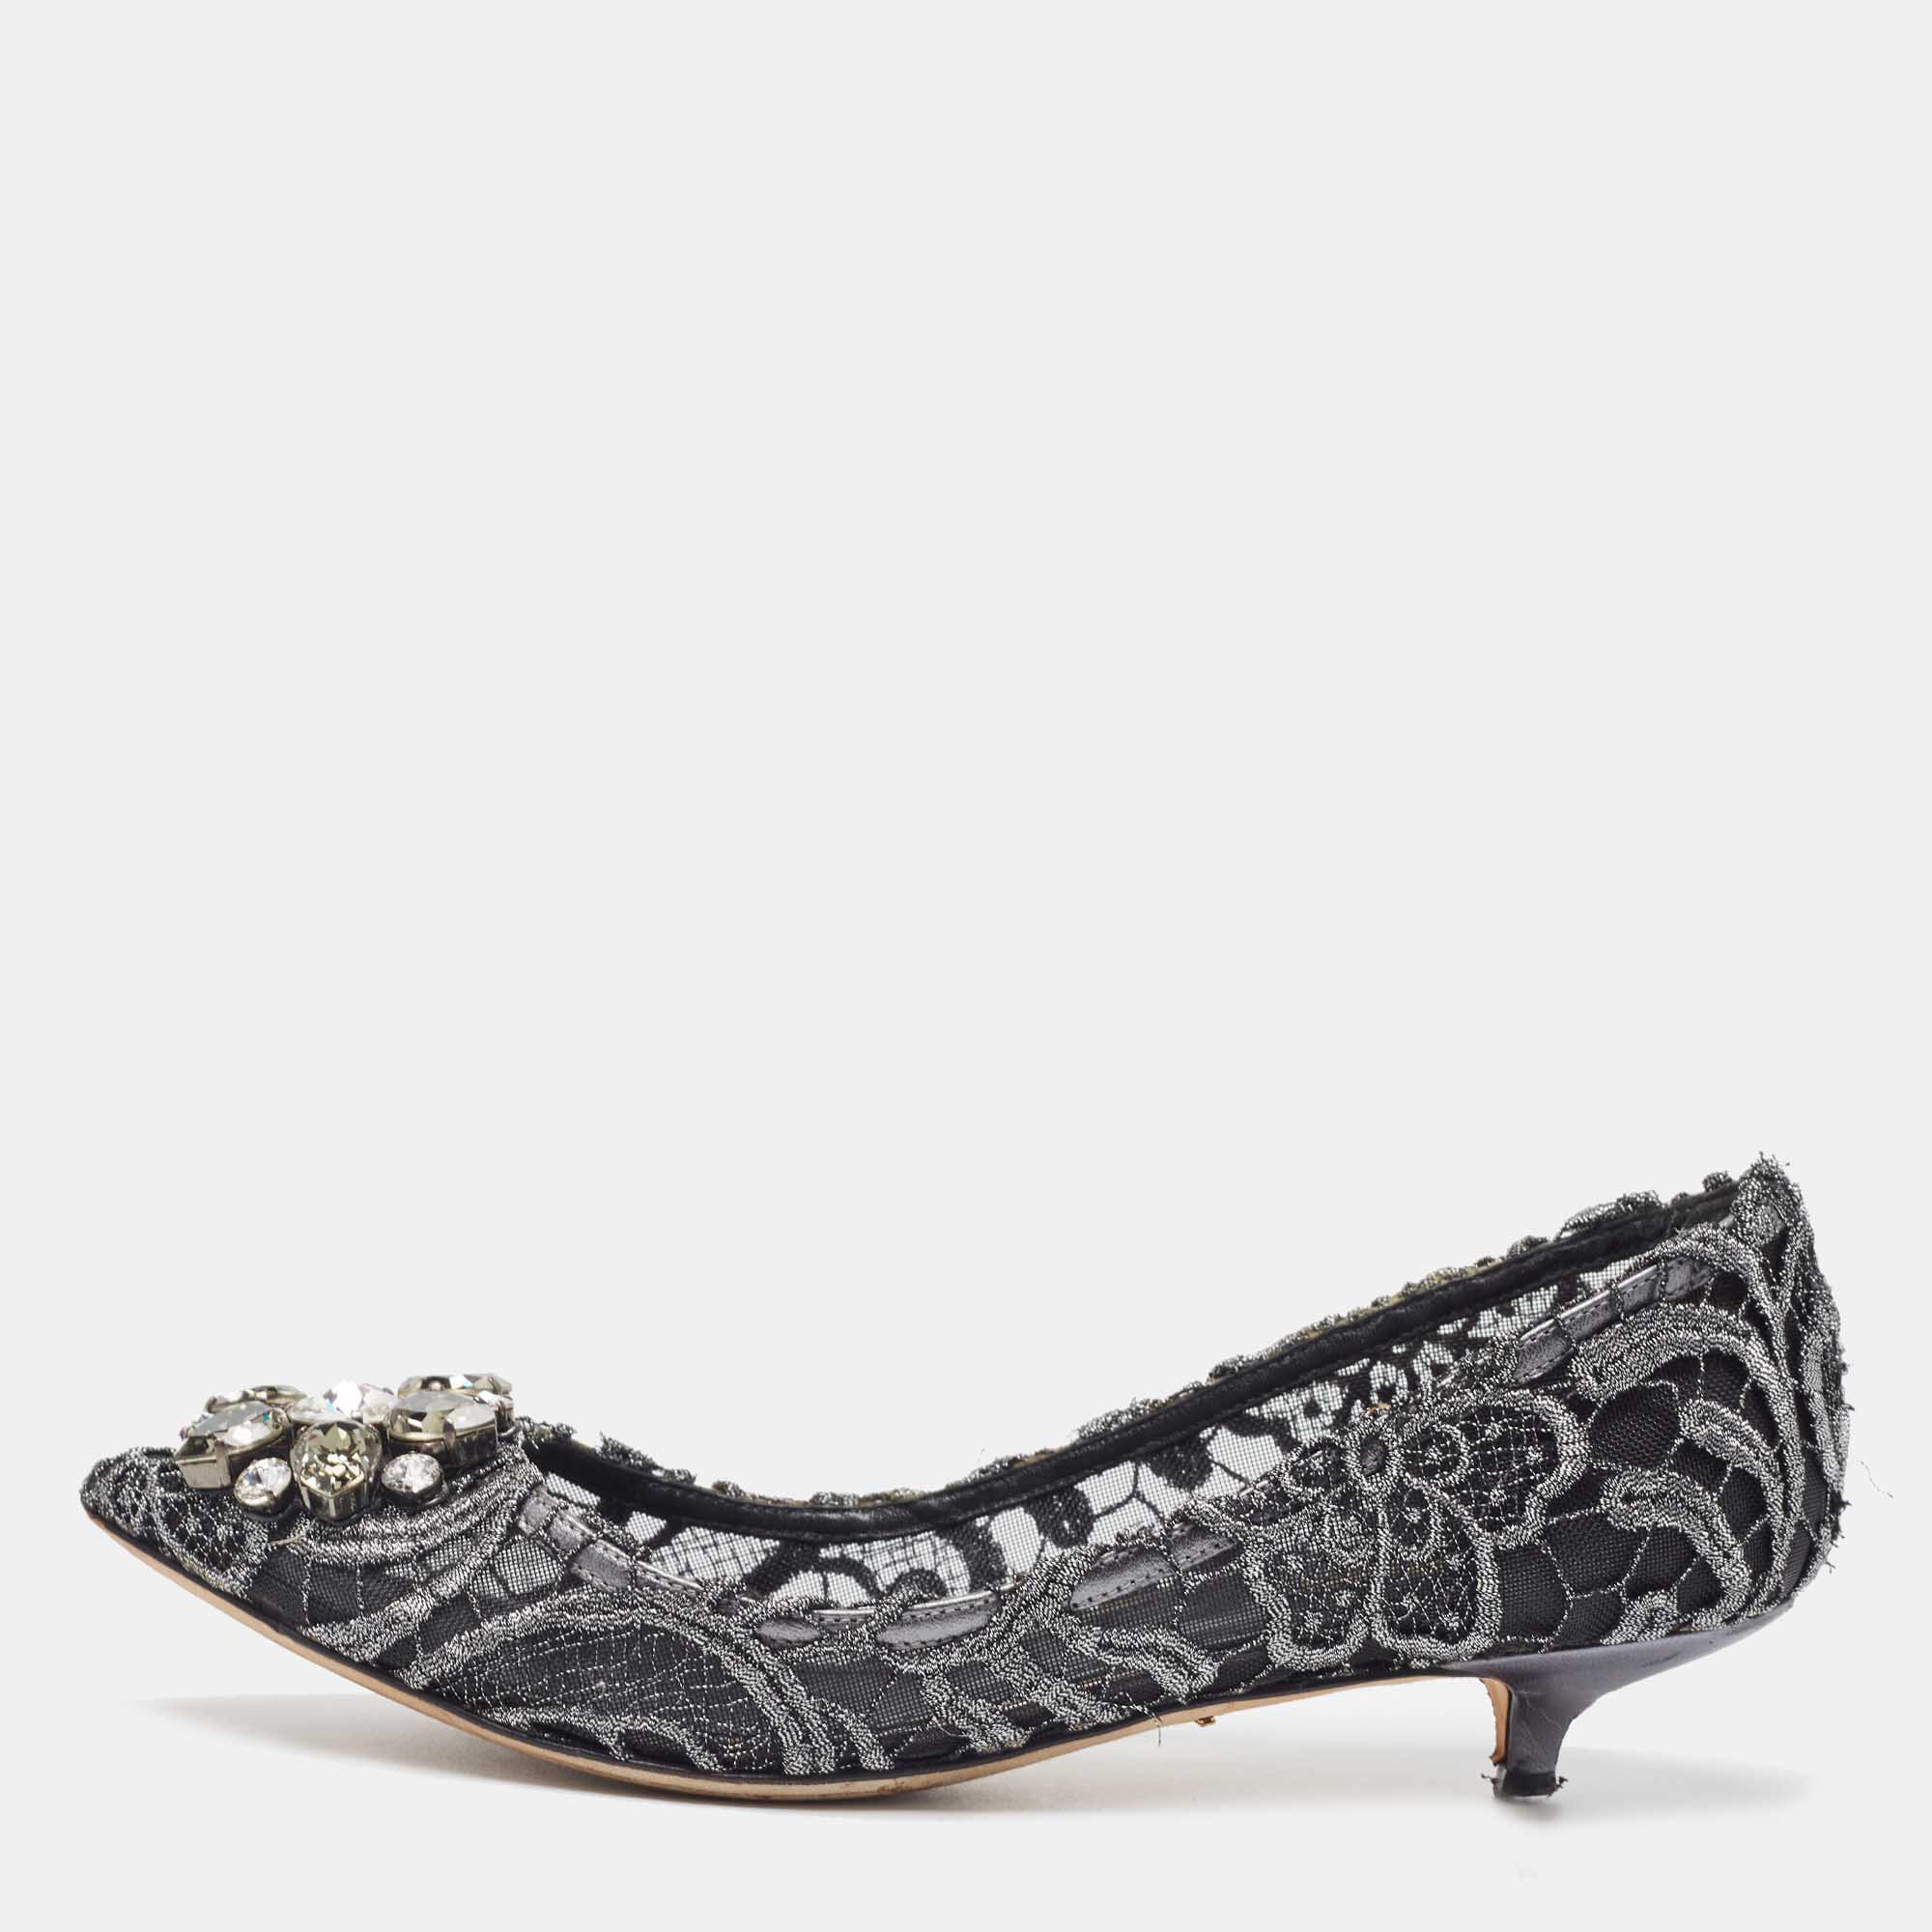 Pre-owned Dolce & Gabbana Silver/black Lace Bellucci Crystal Embellished Kitten Heel Pumps Size 37 In Grey